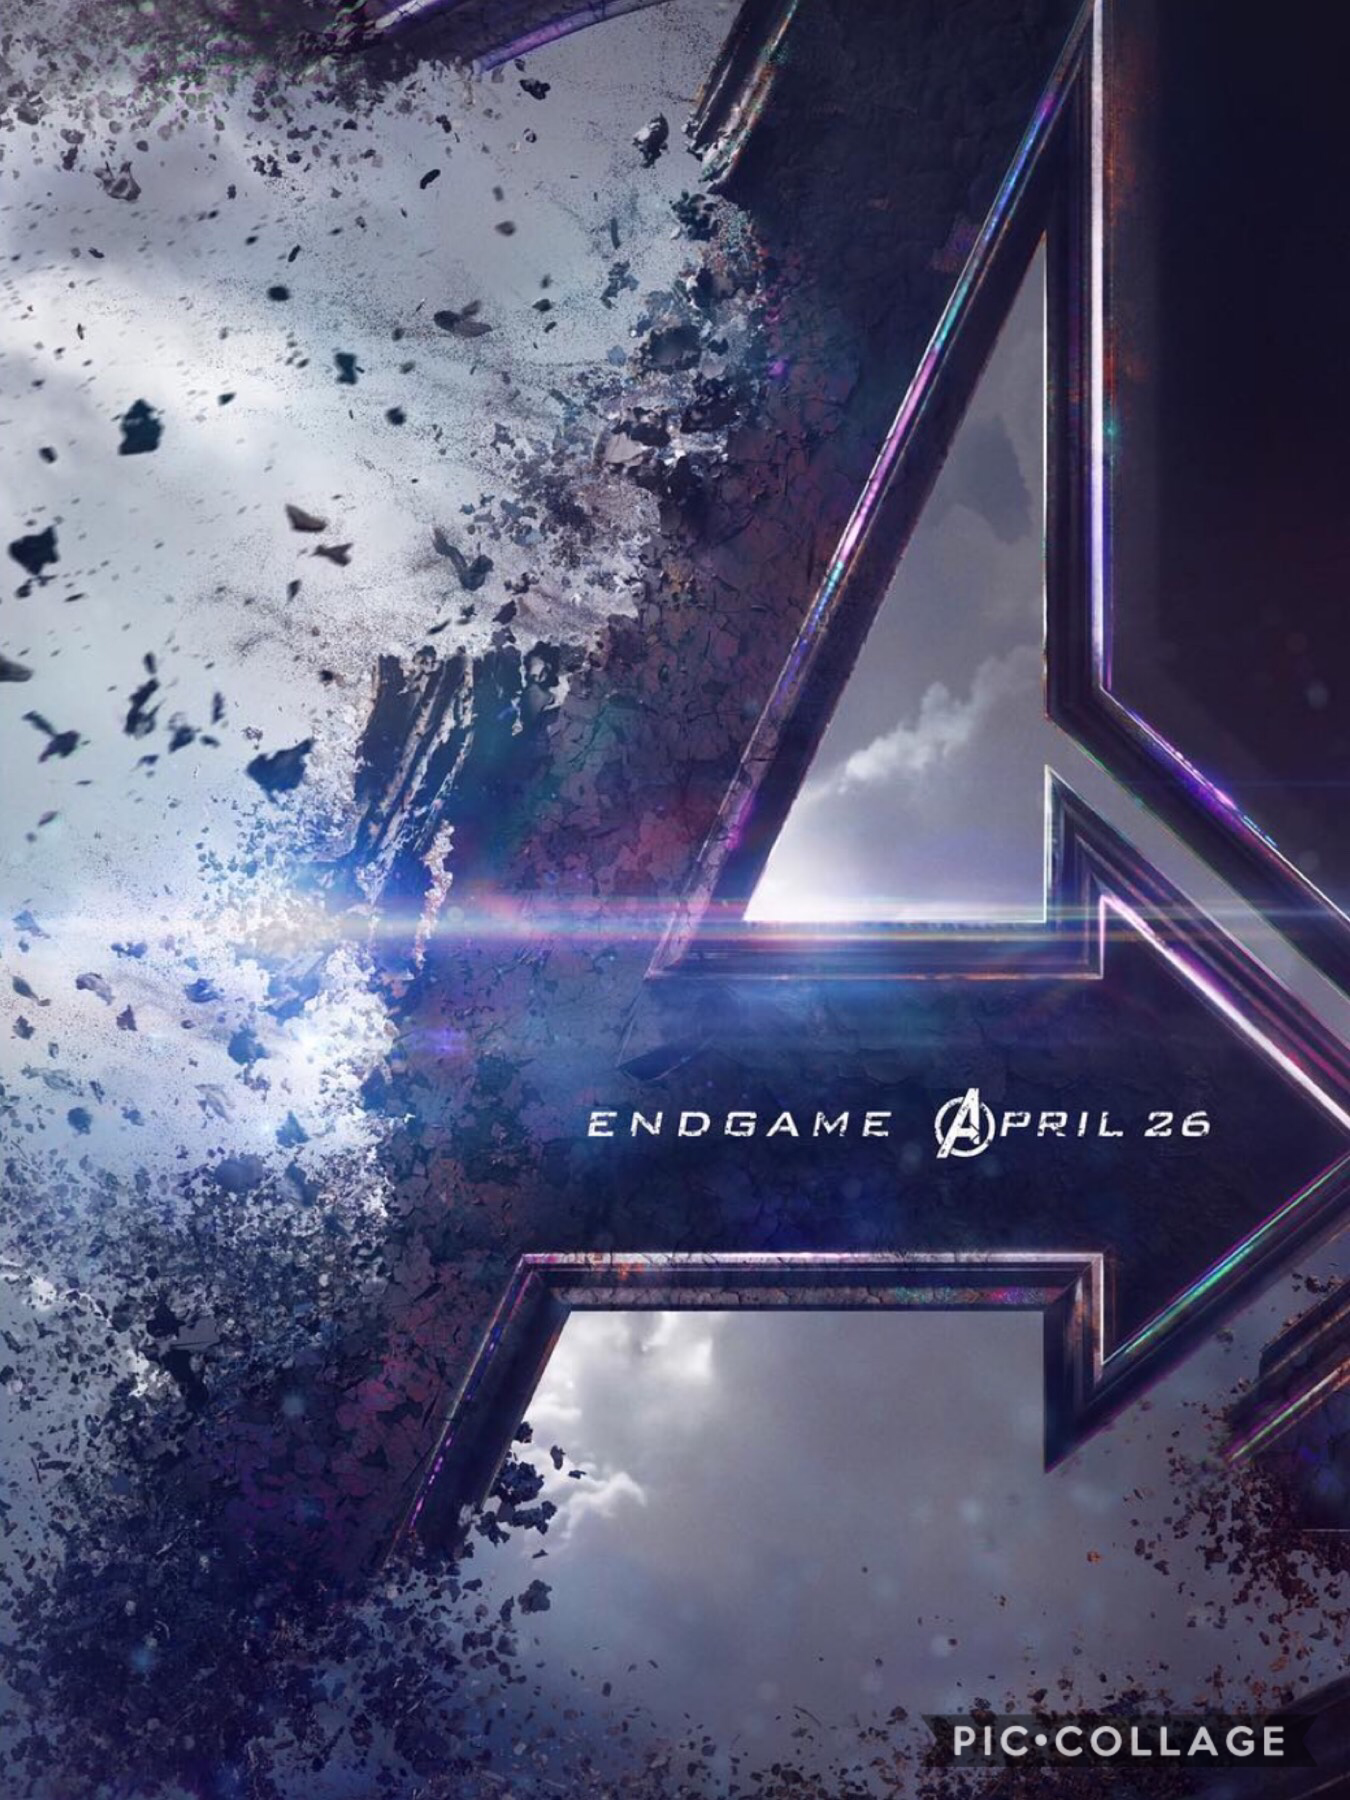 Check out the new poster for Marvel Studios’ #AvengersEndGame. In theaters April 26, 2019. “This is the end” 💜⚡️